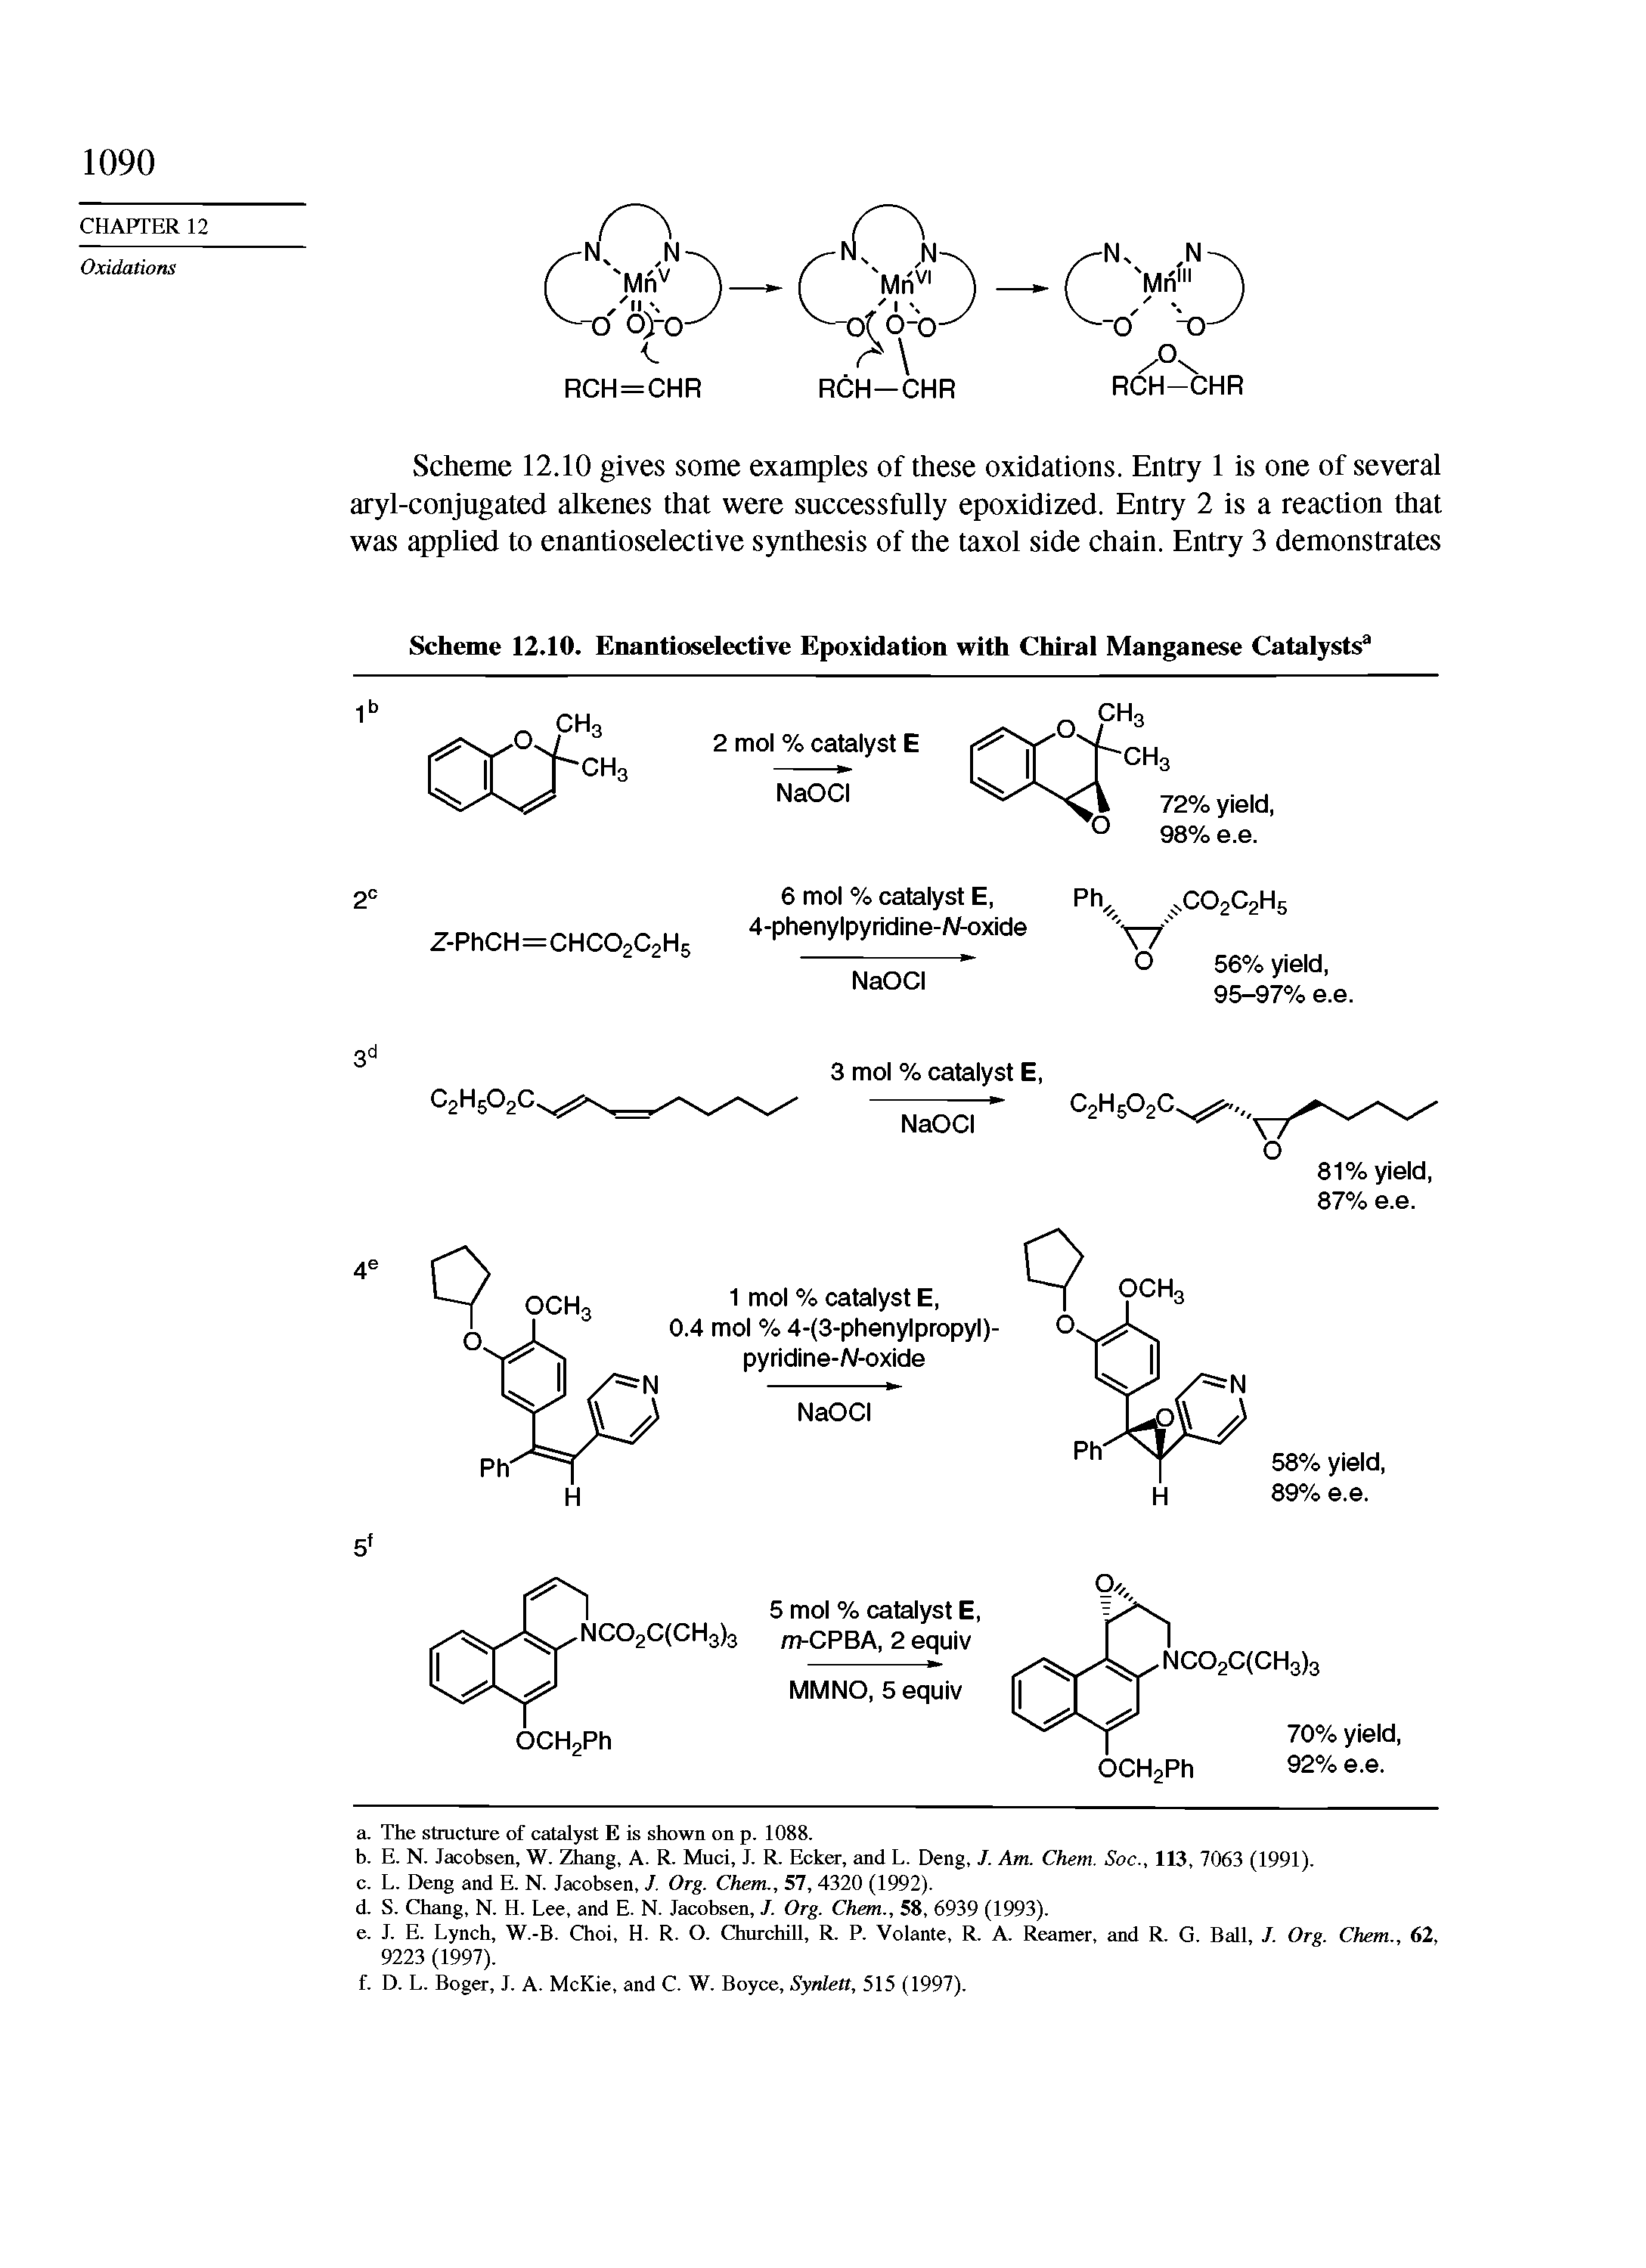 Scheme 12.10. Enantioselective Epoxidation with Chiral Manganese Catalysts3...